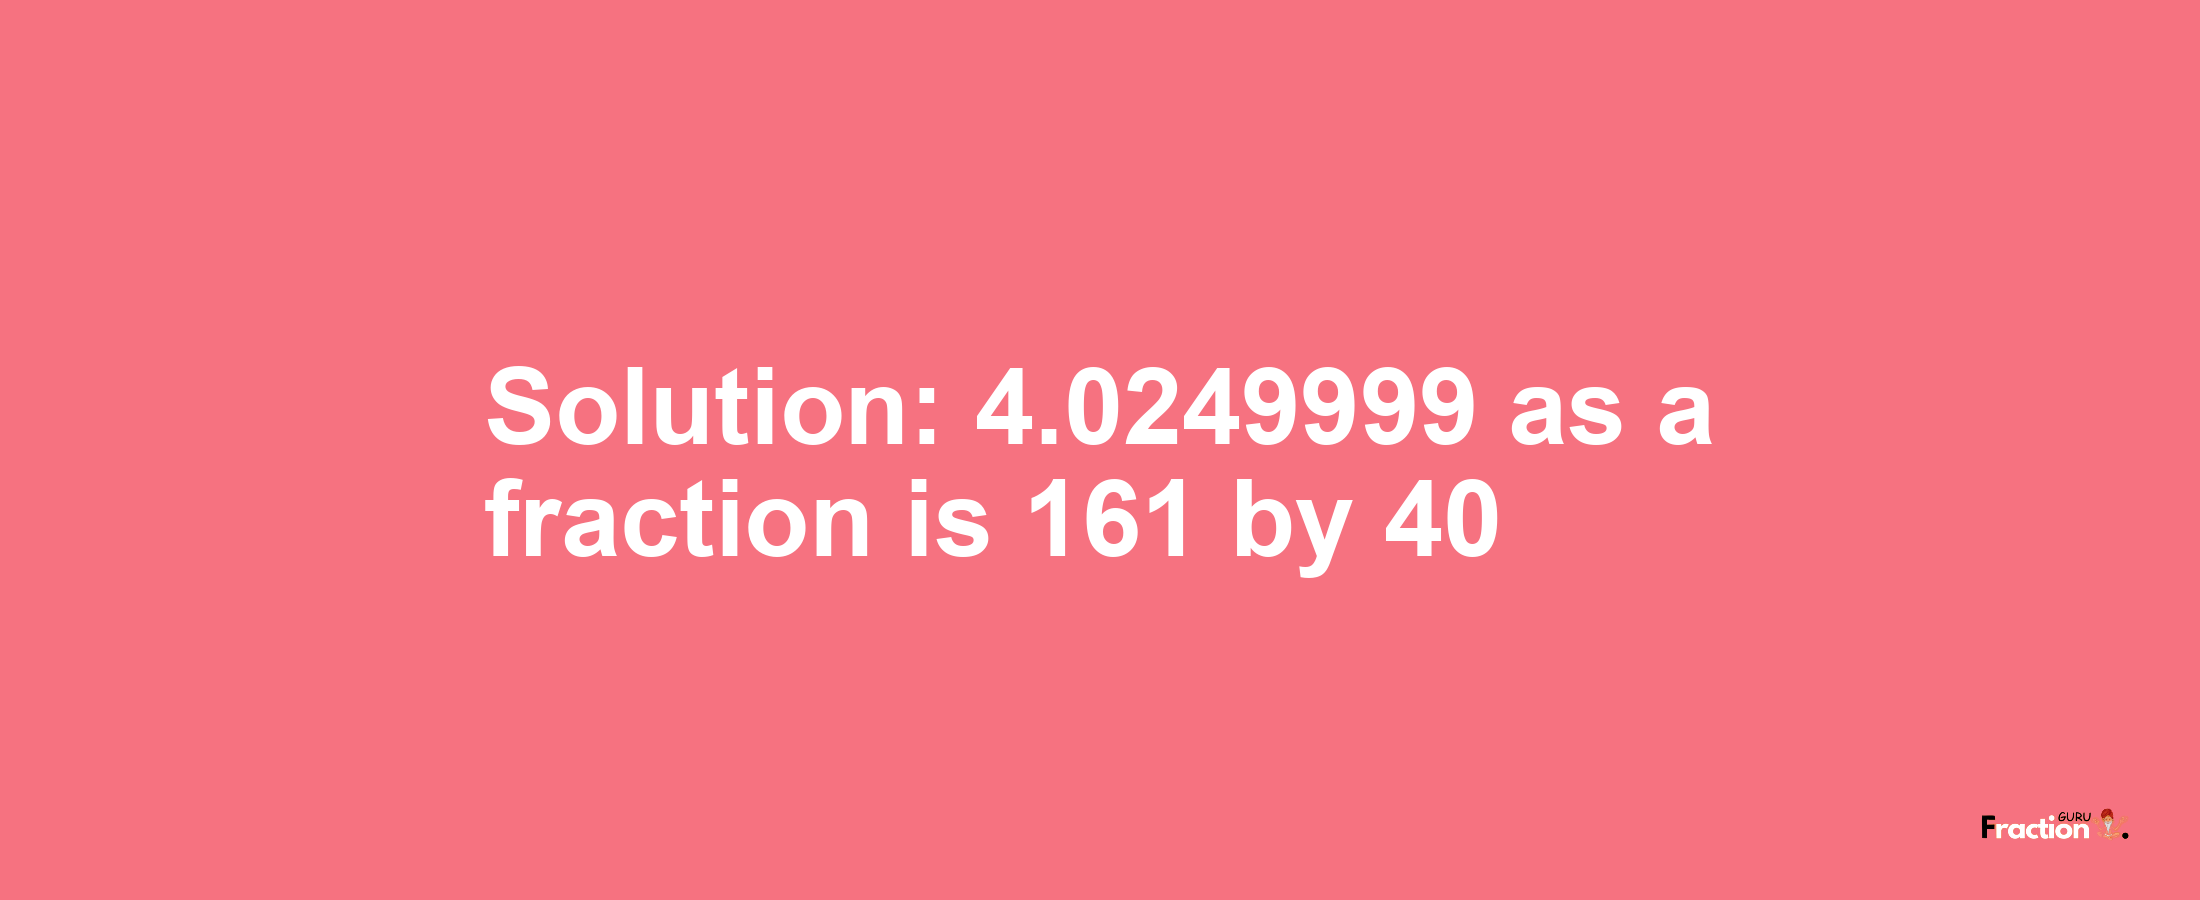 Solution:4.0249999 as a fraction is 161/40